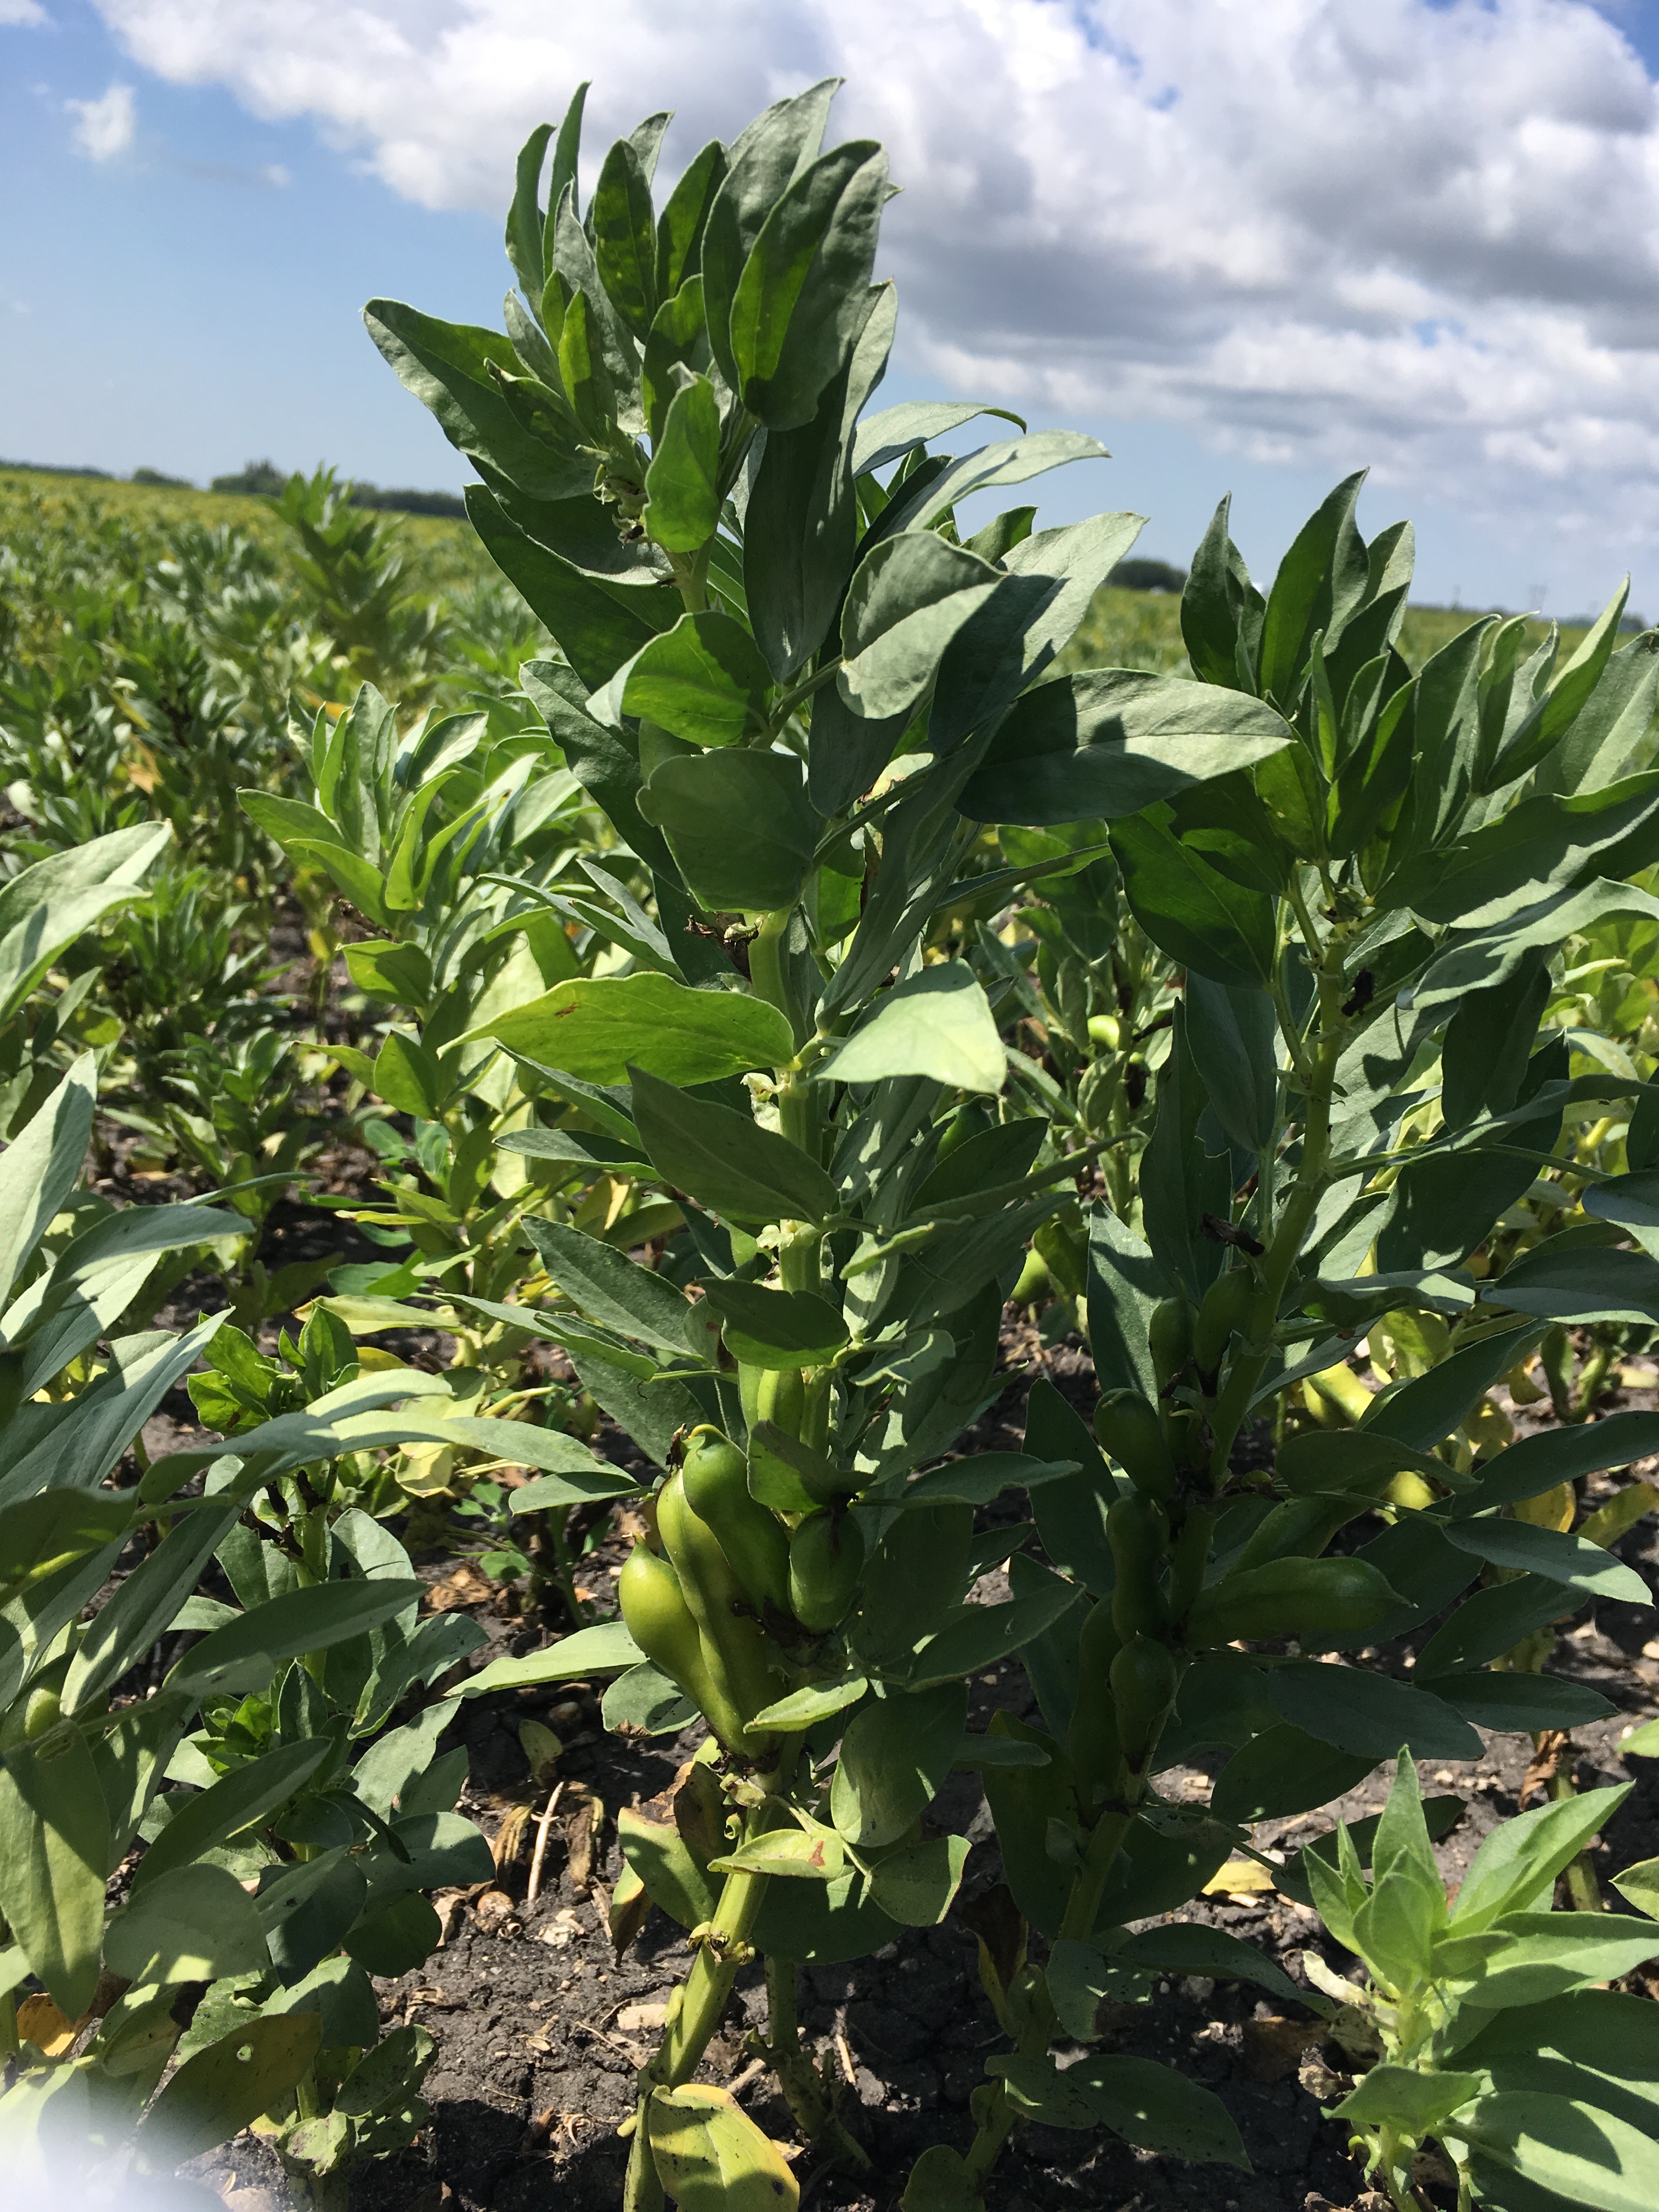 Picture of fava bean crops in the field on a bright sunny day